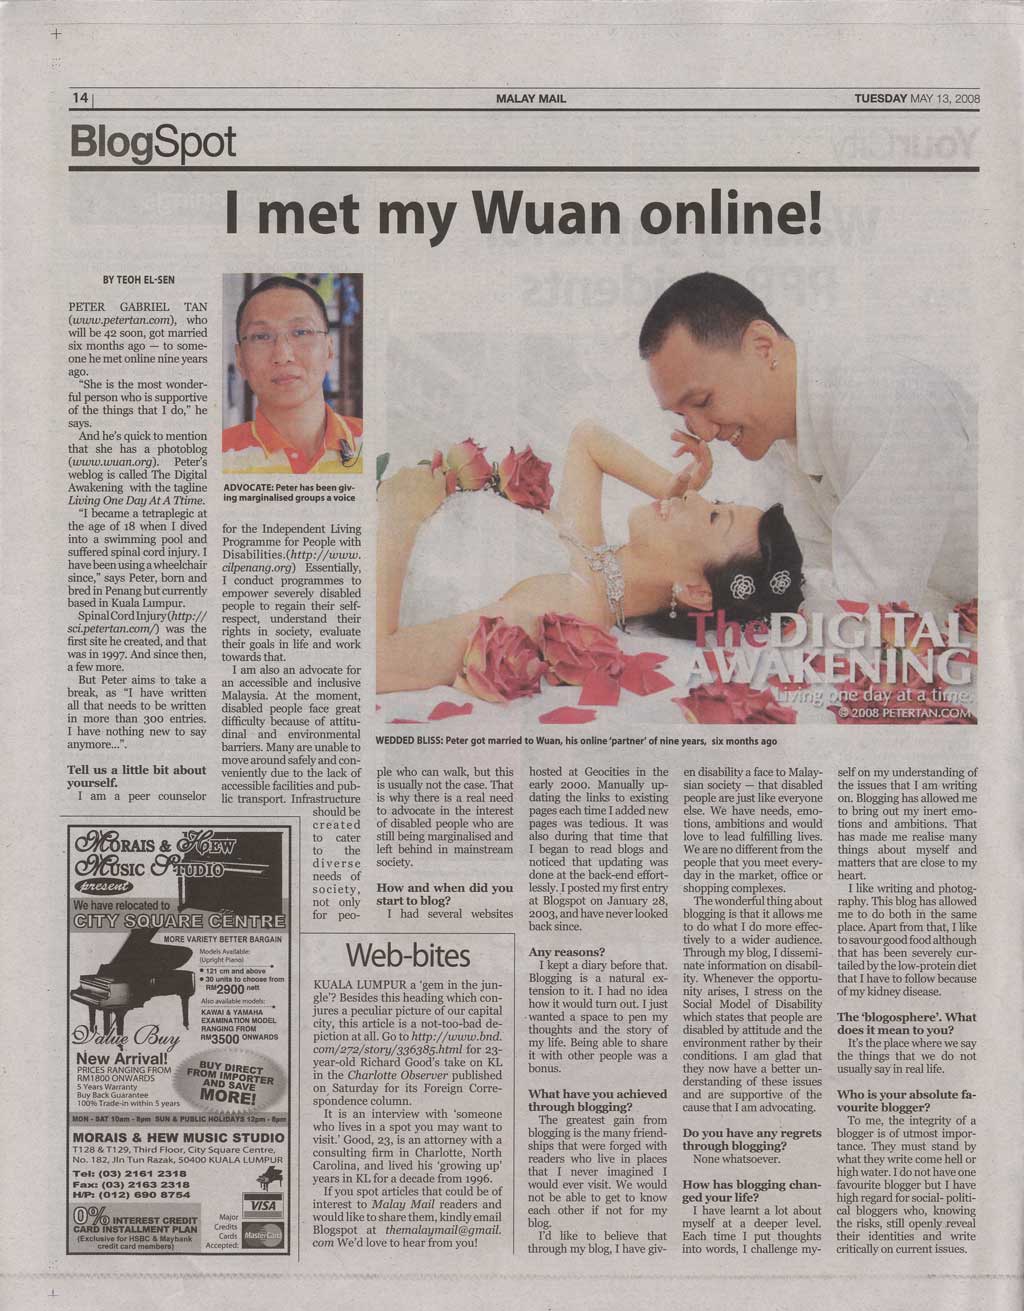 I Met My Wuan Online - Malay Mail, May 13, 2008